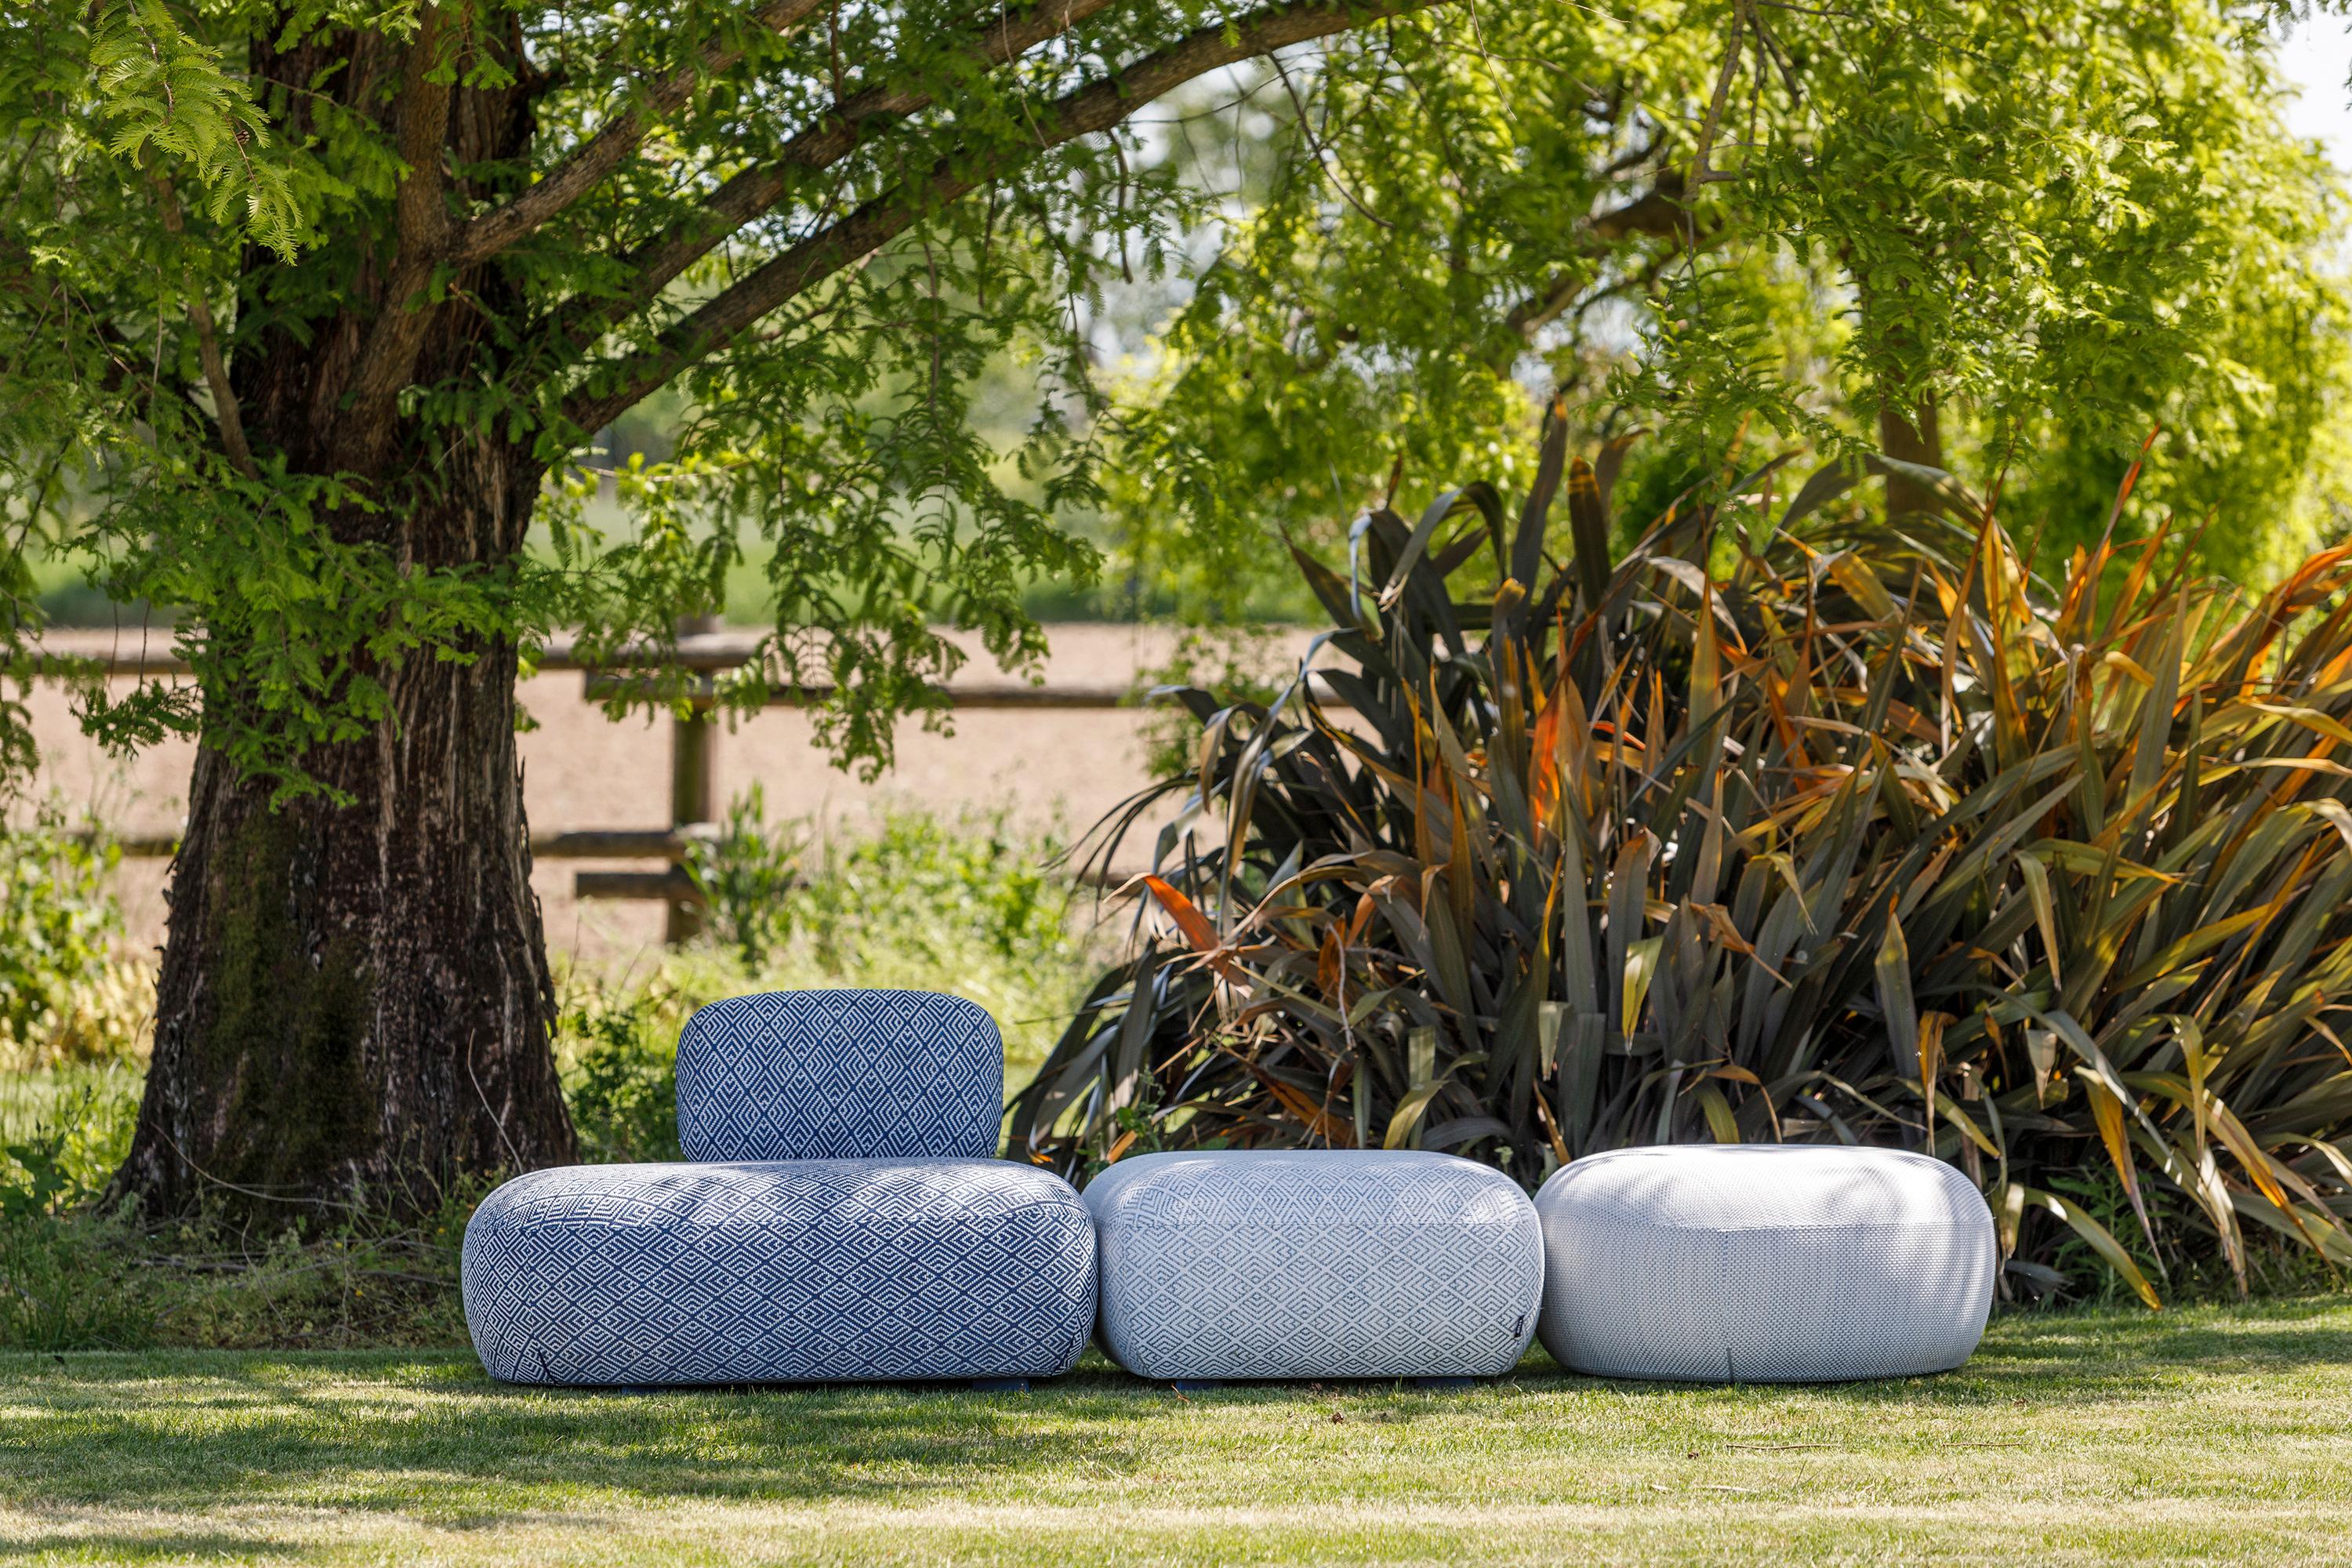 Steel 21st Century Modern Big Square Pouf for Outdoor Code Made in Italy For Sale